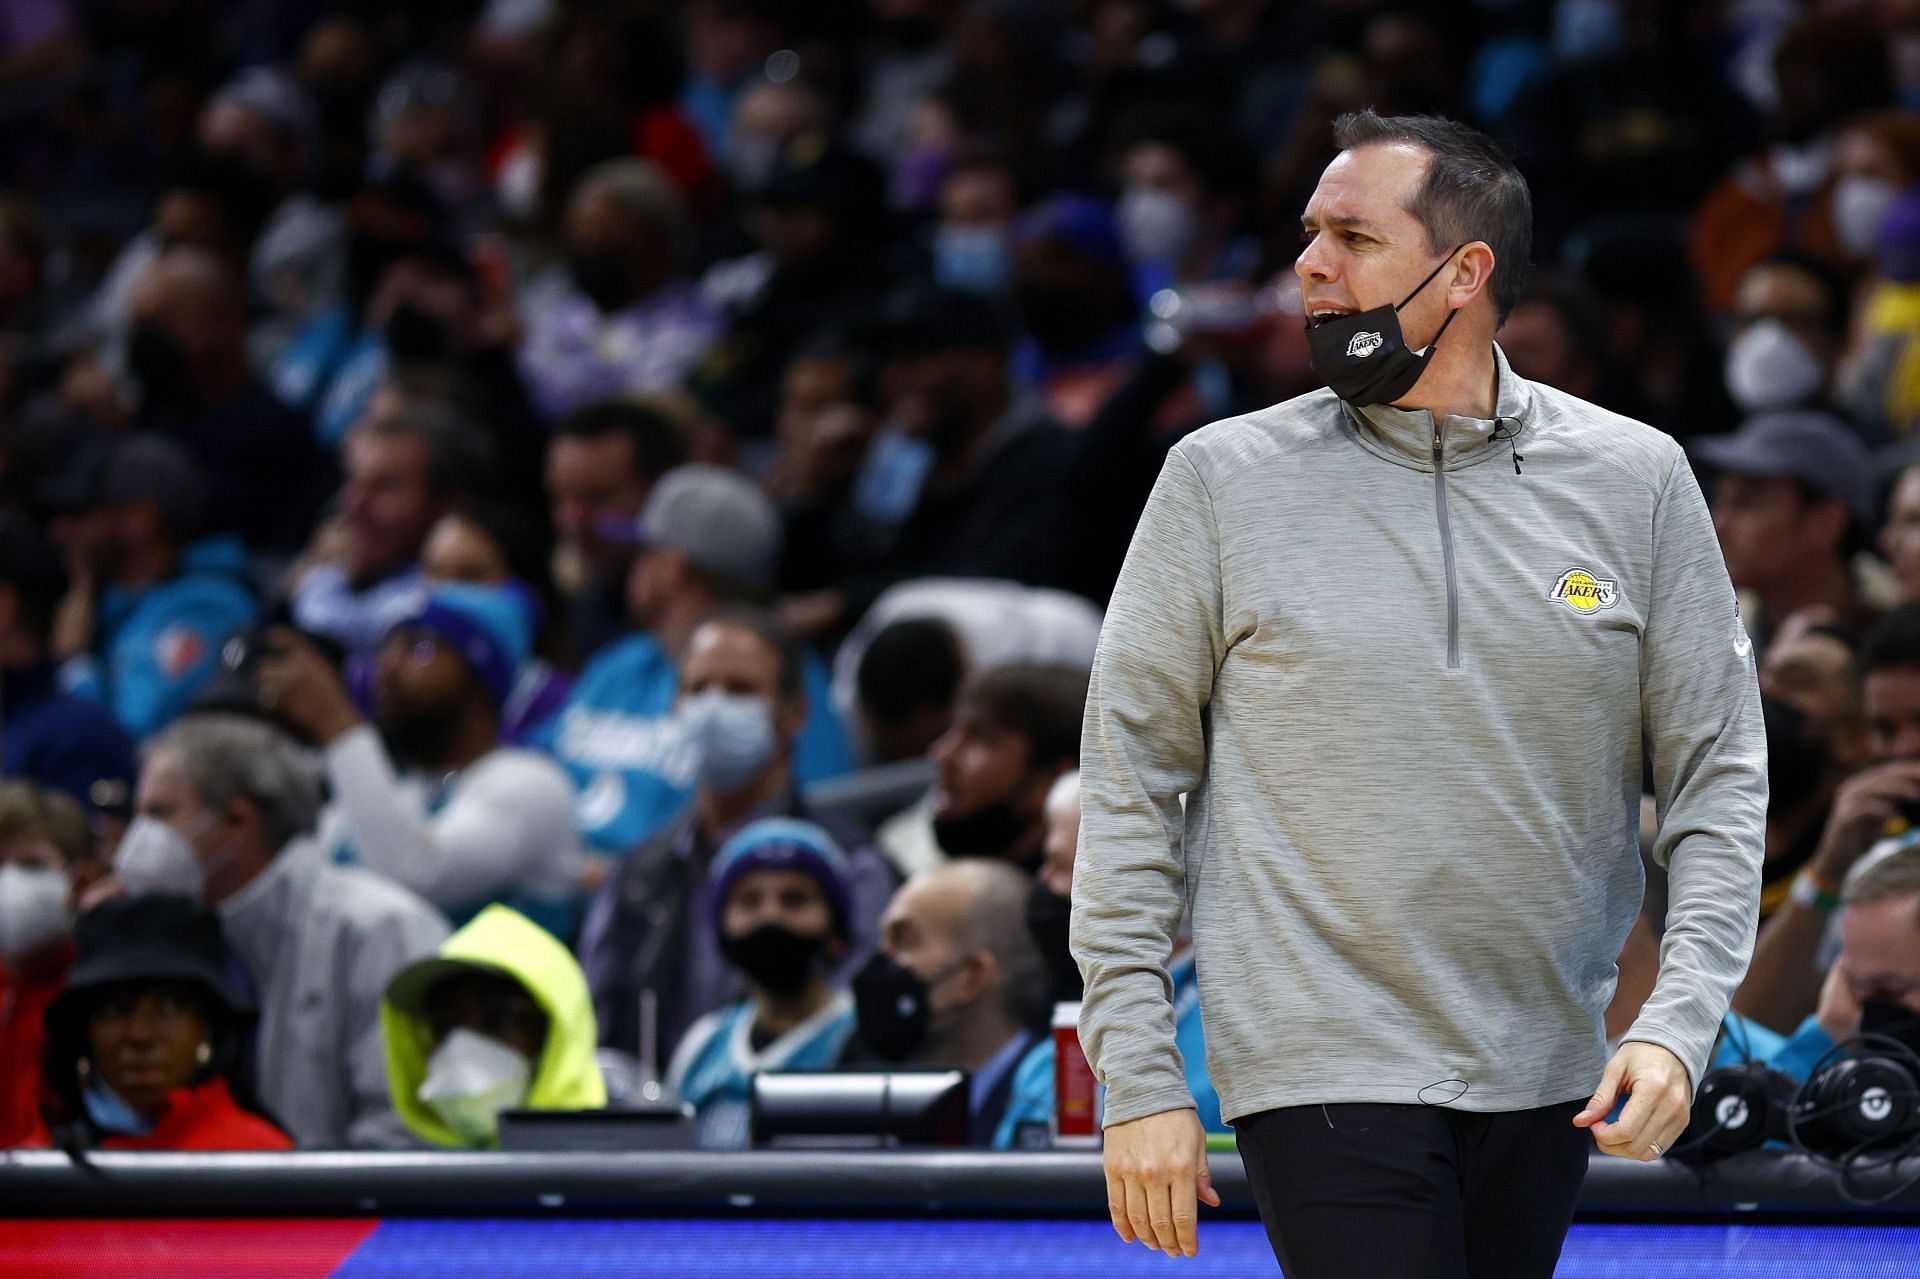 Los Angeles Lakers v Charlotte Hornets; Frank Vogel reacts to a call during the game